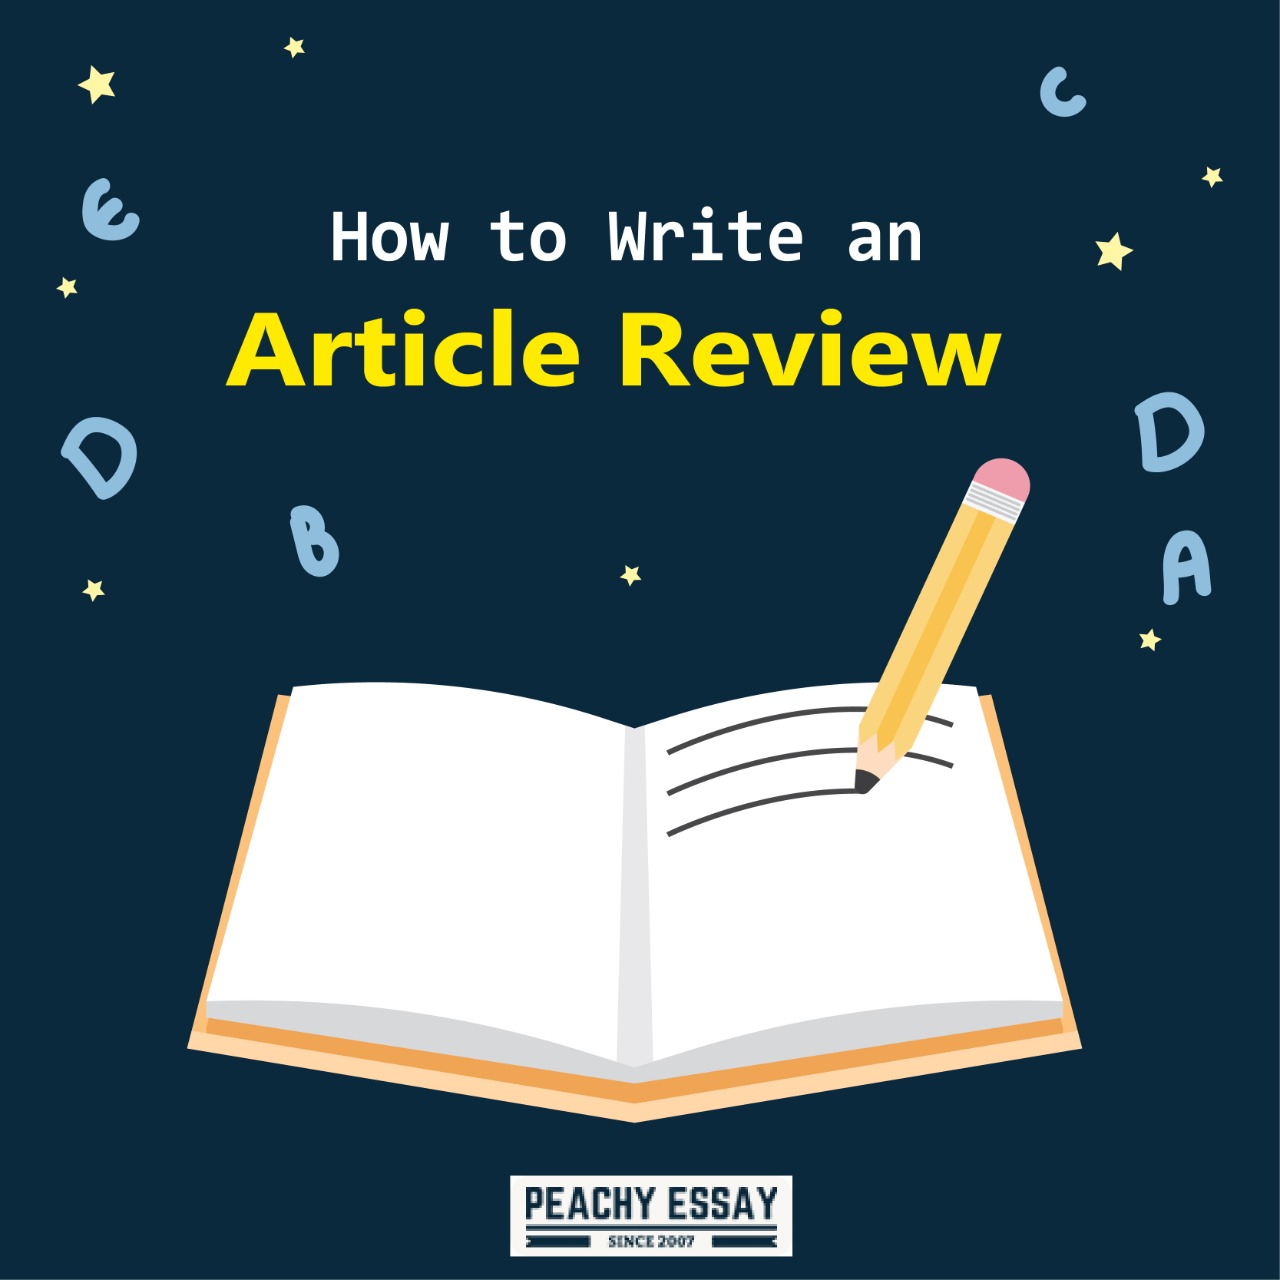 How to Write an Article Review - Complete Writing Guid - Peachy Essay